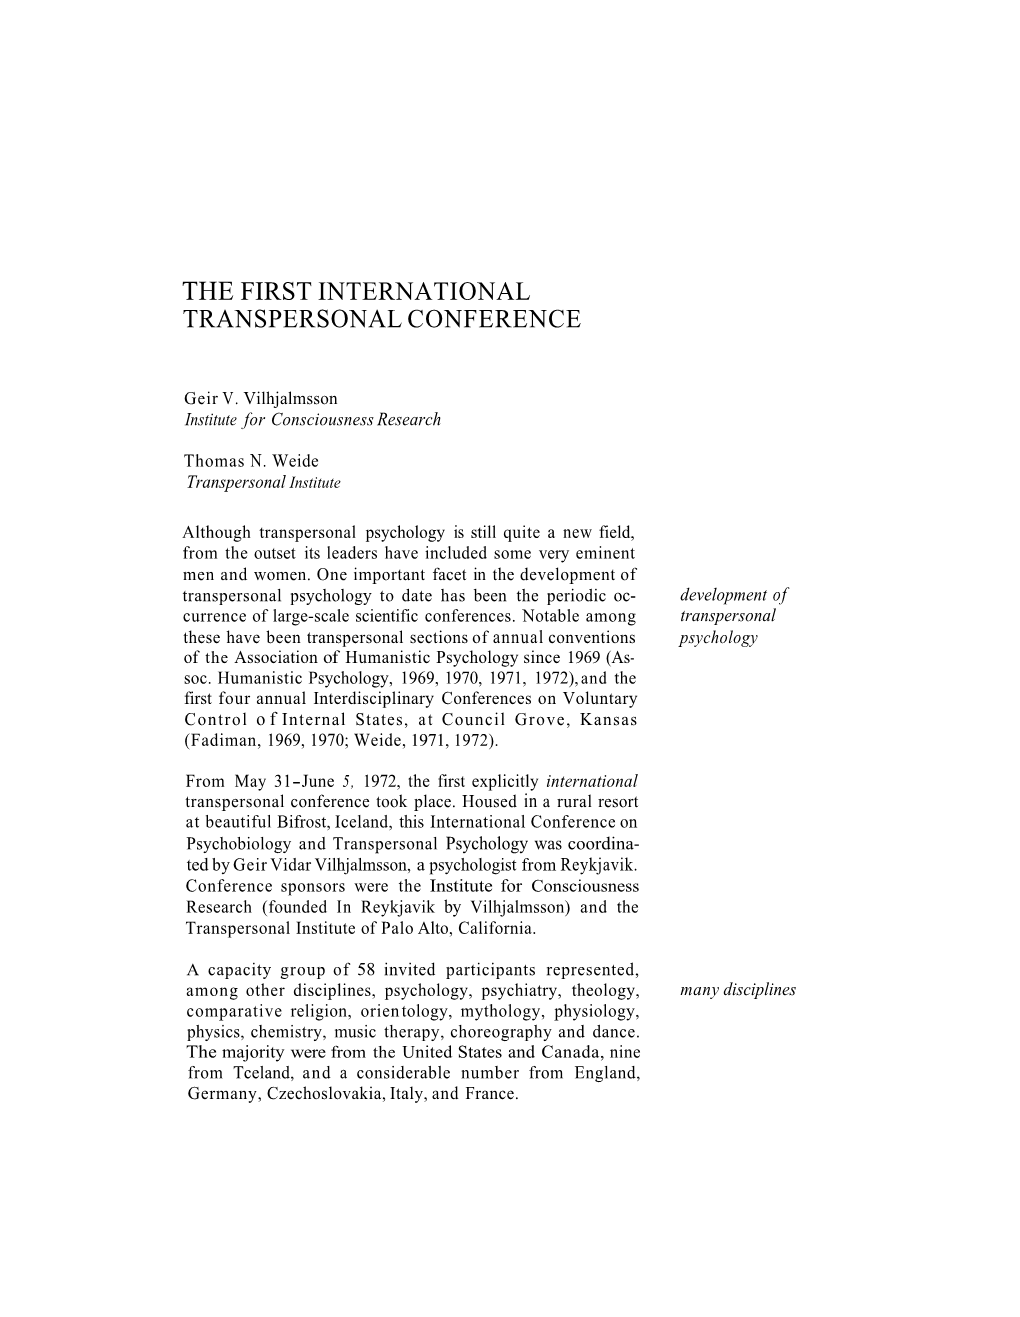 The First International Transpersonal Conference